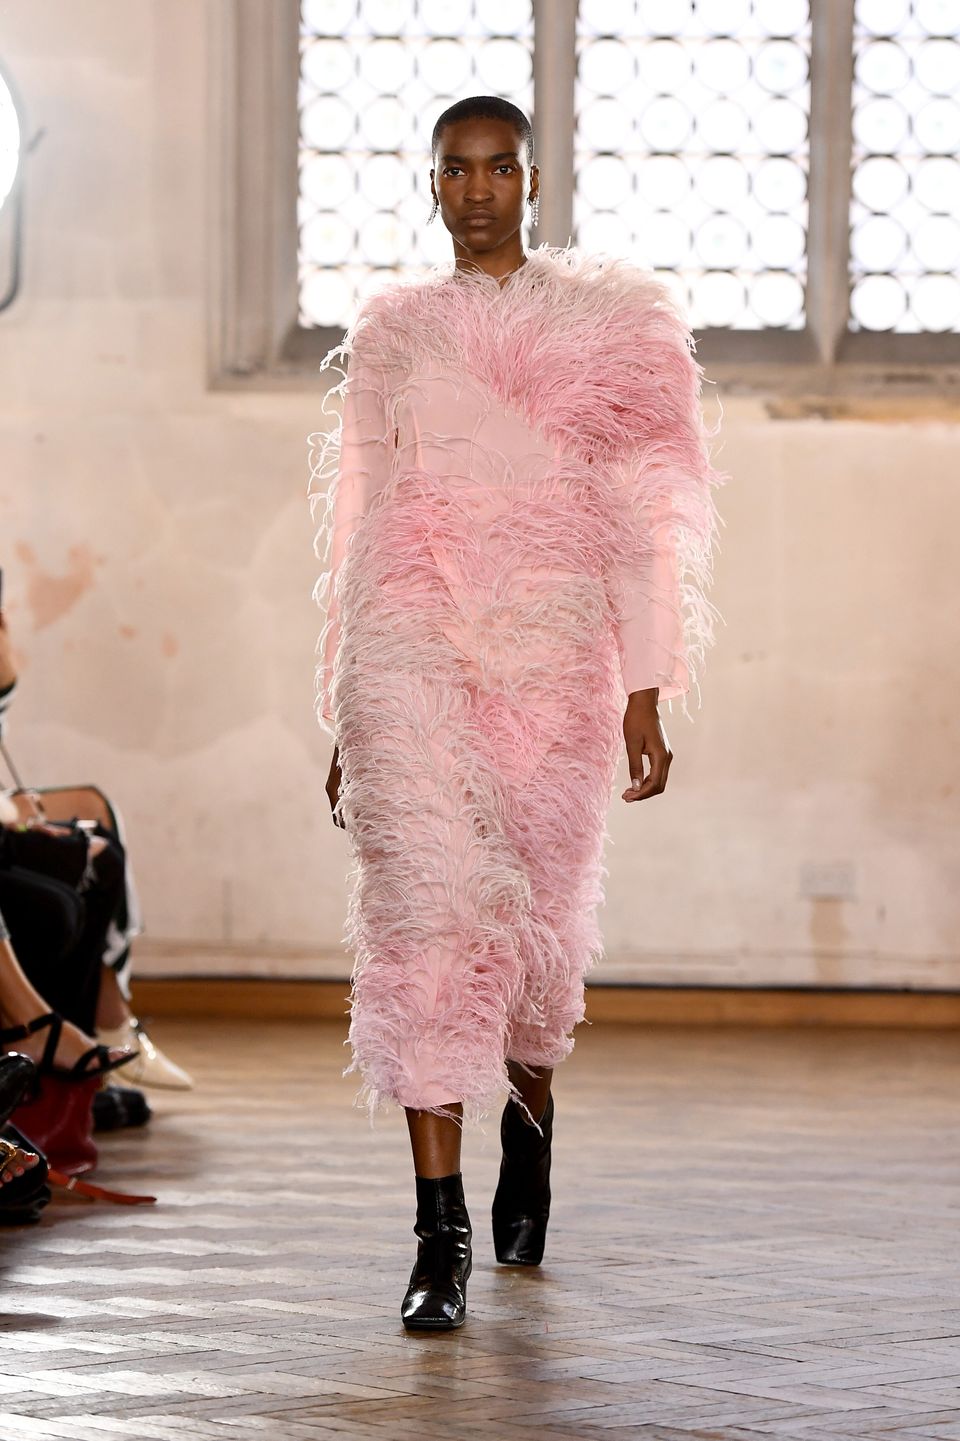 Every Must-See Look From London Fashion Week | HuffPost Life